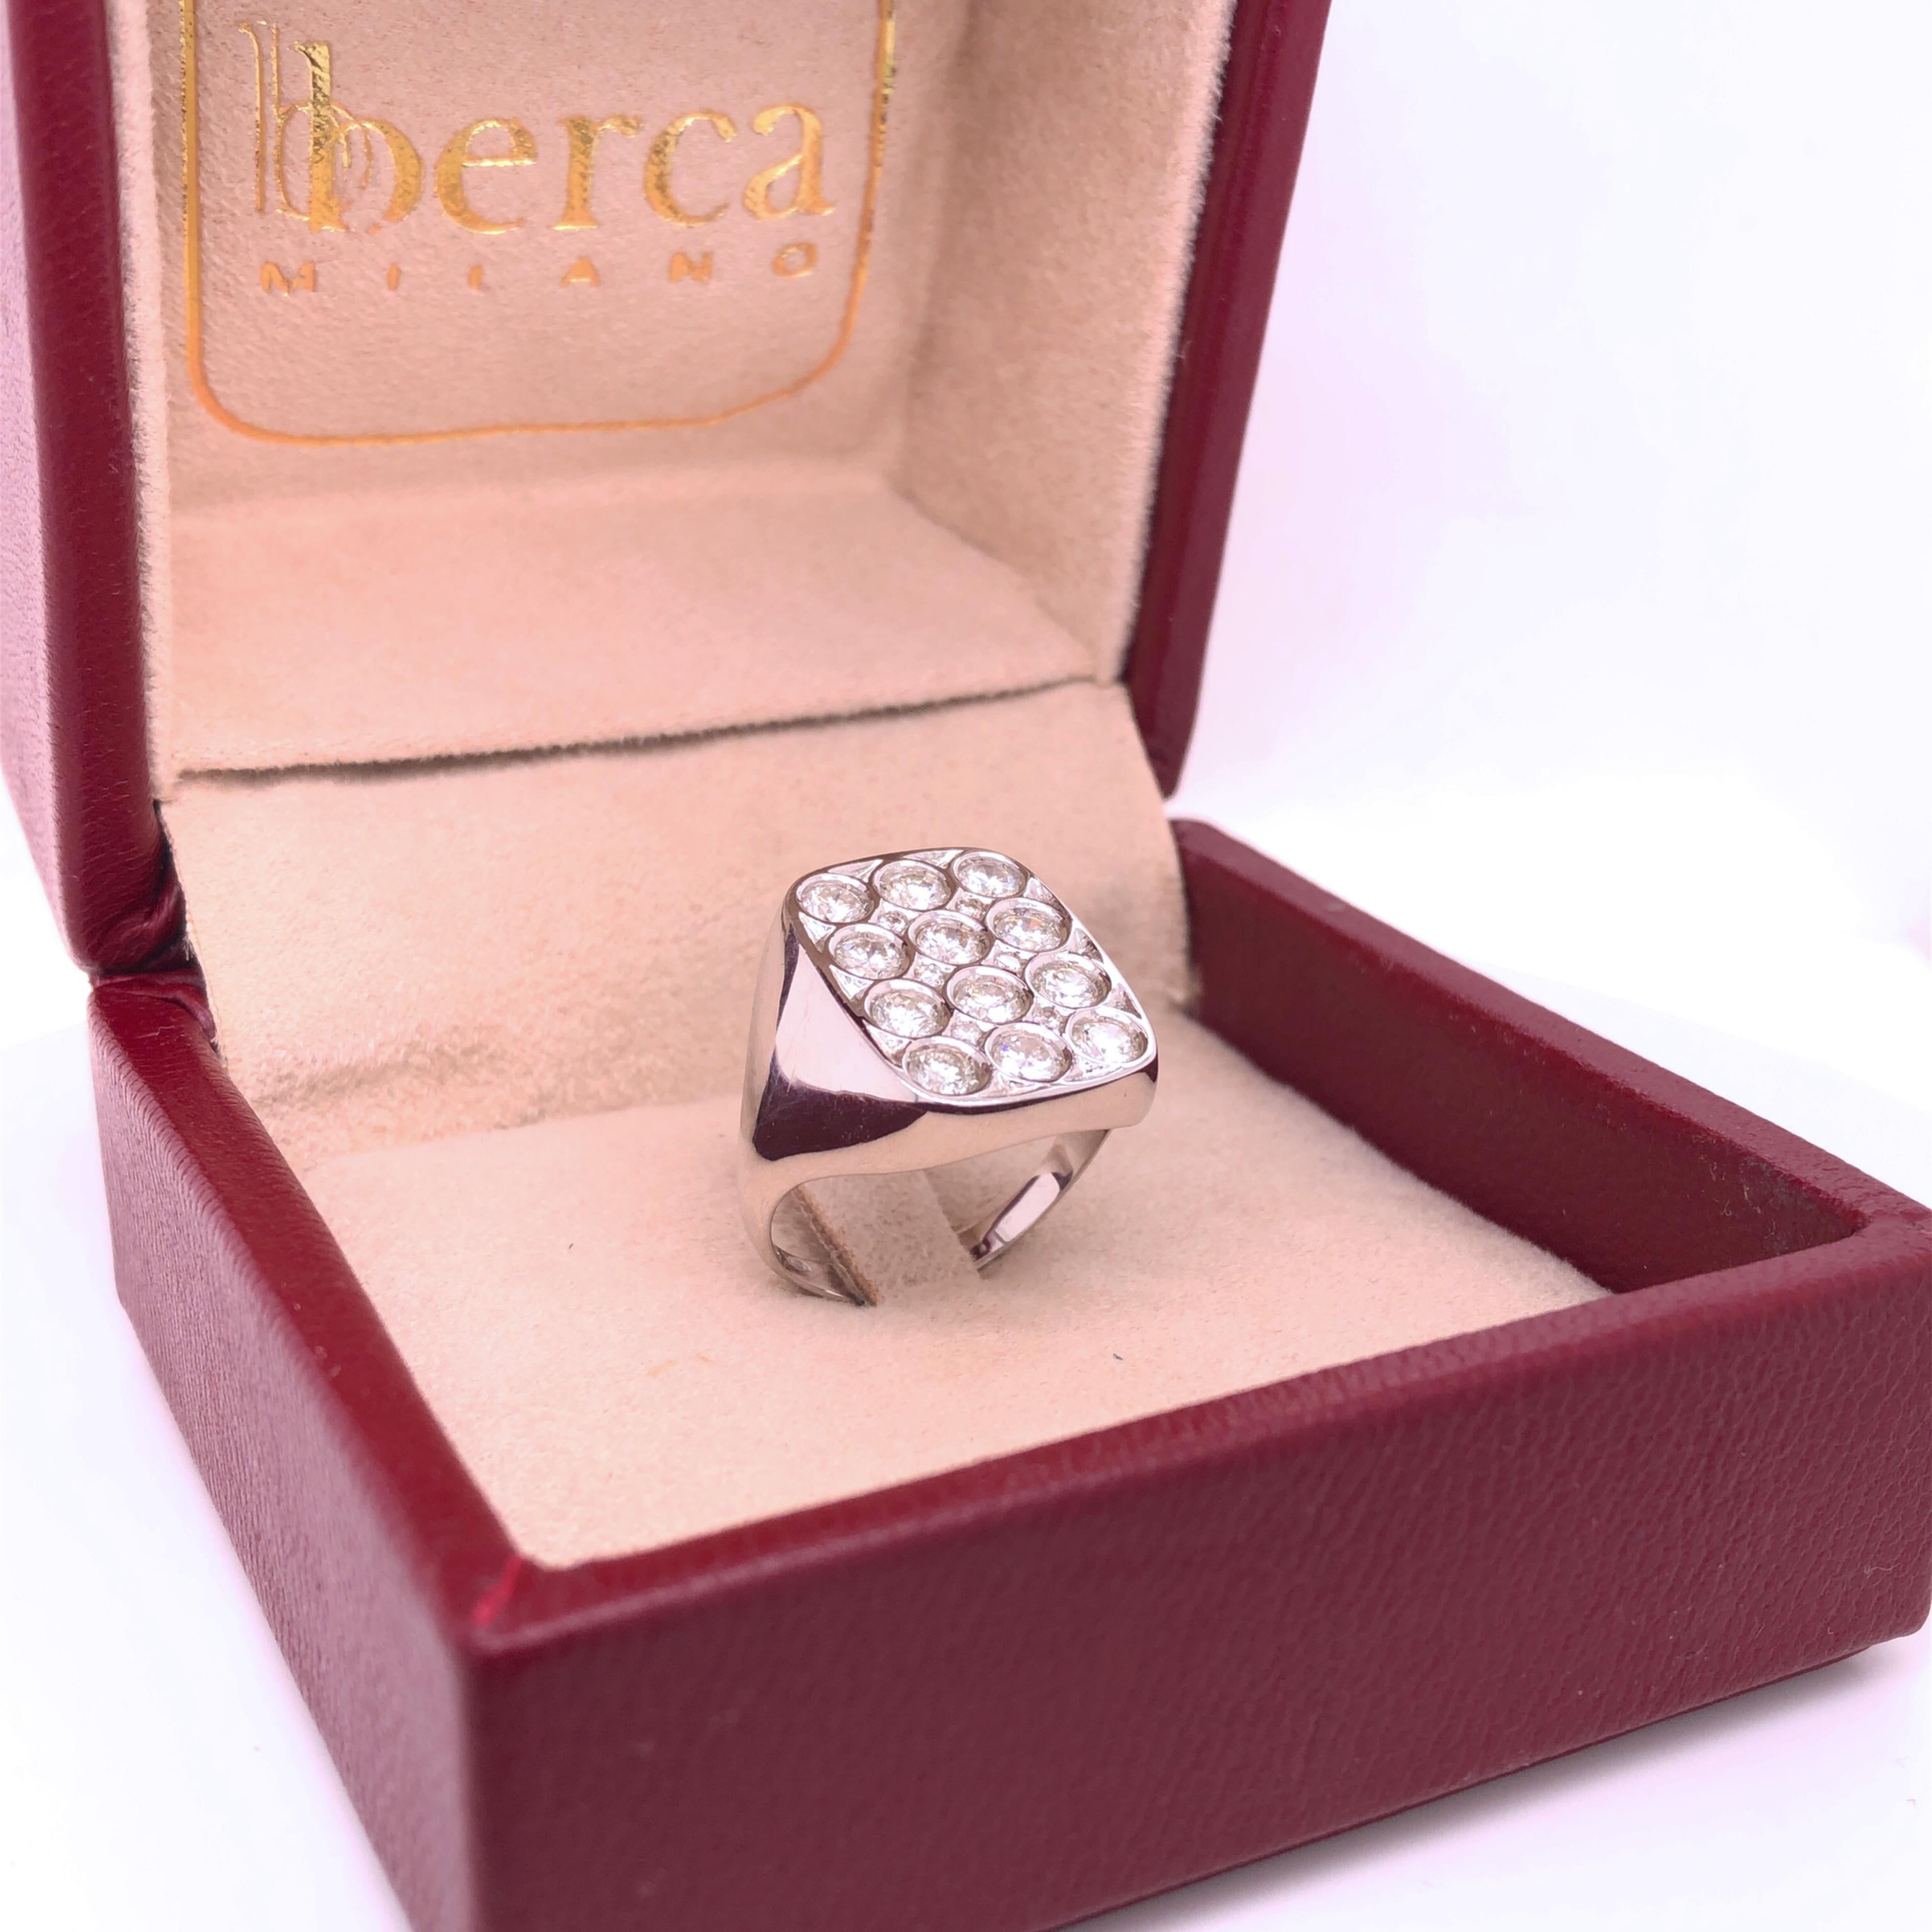 Berca 1.56 Carat White Diamond Cocktail Ring In New Condition For Sale In Valenza, IT